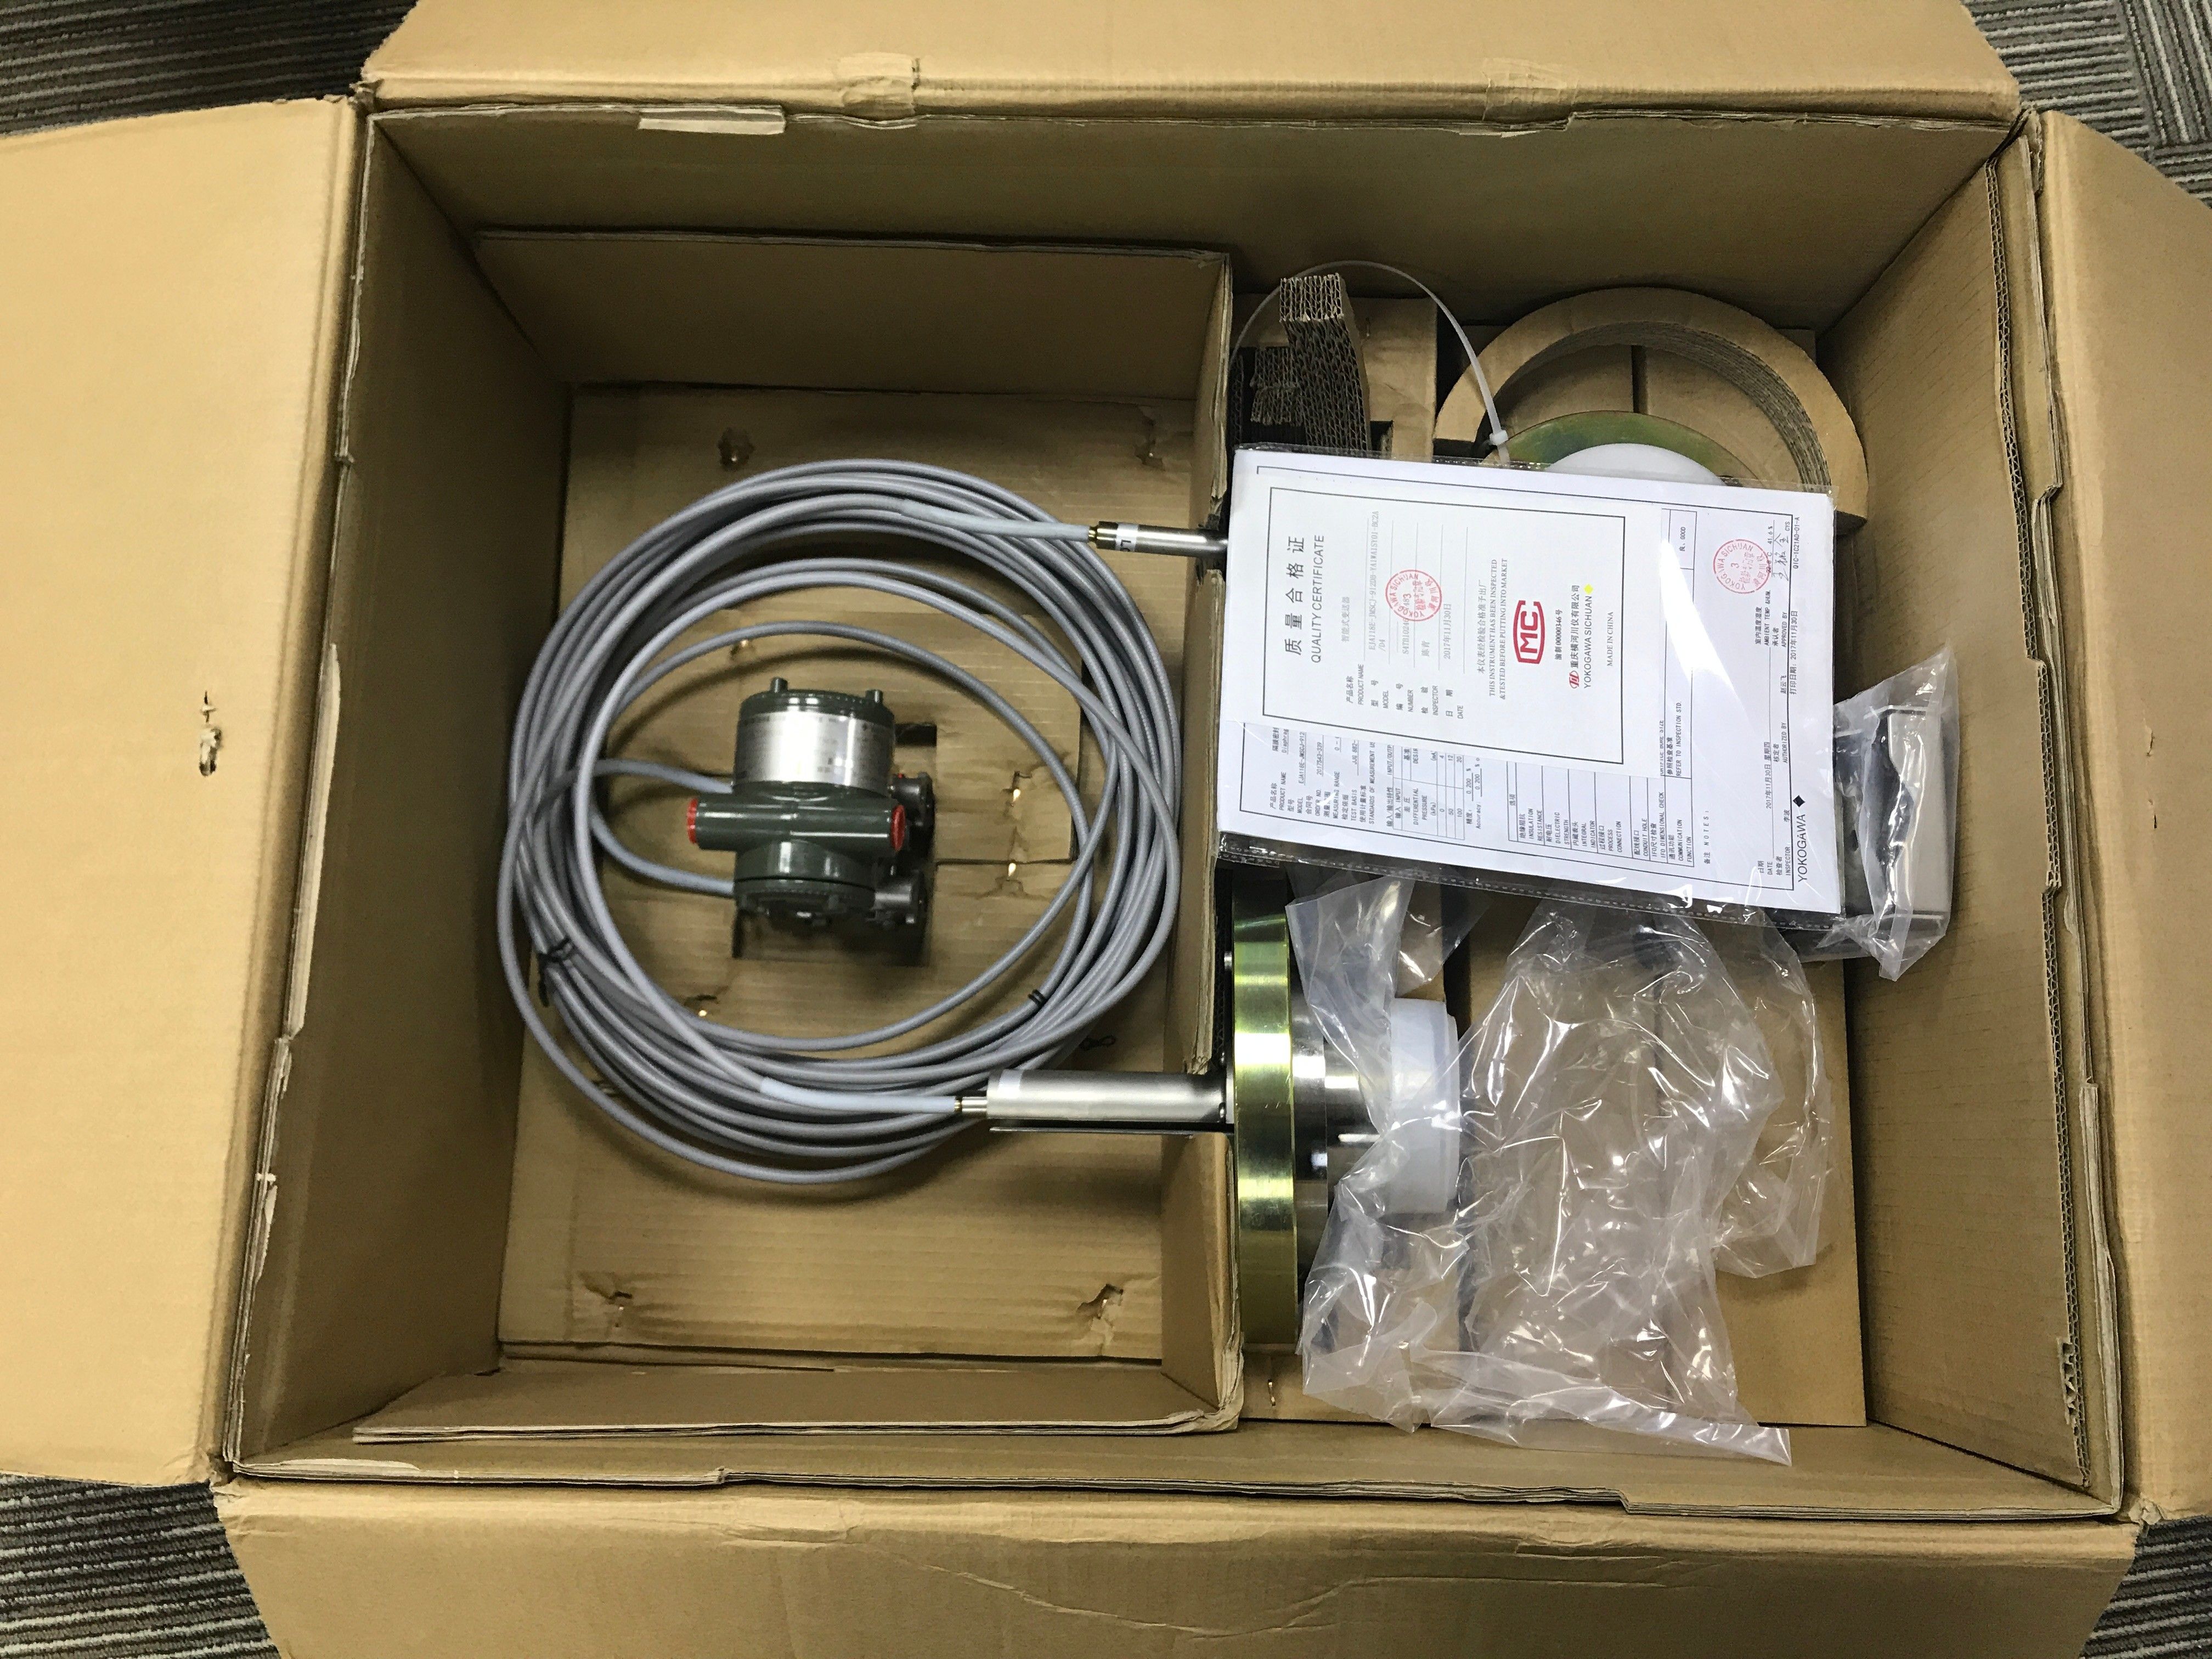 Yokogawa EJX438A Gauge Pressure Transmitter with a Remote Diaphragm Seal based on the EJX-A Series.